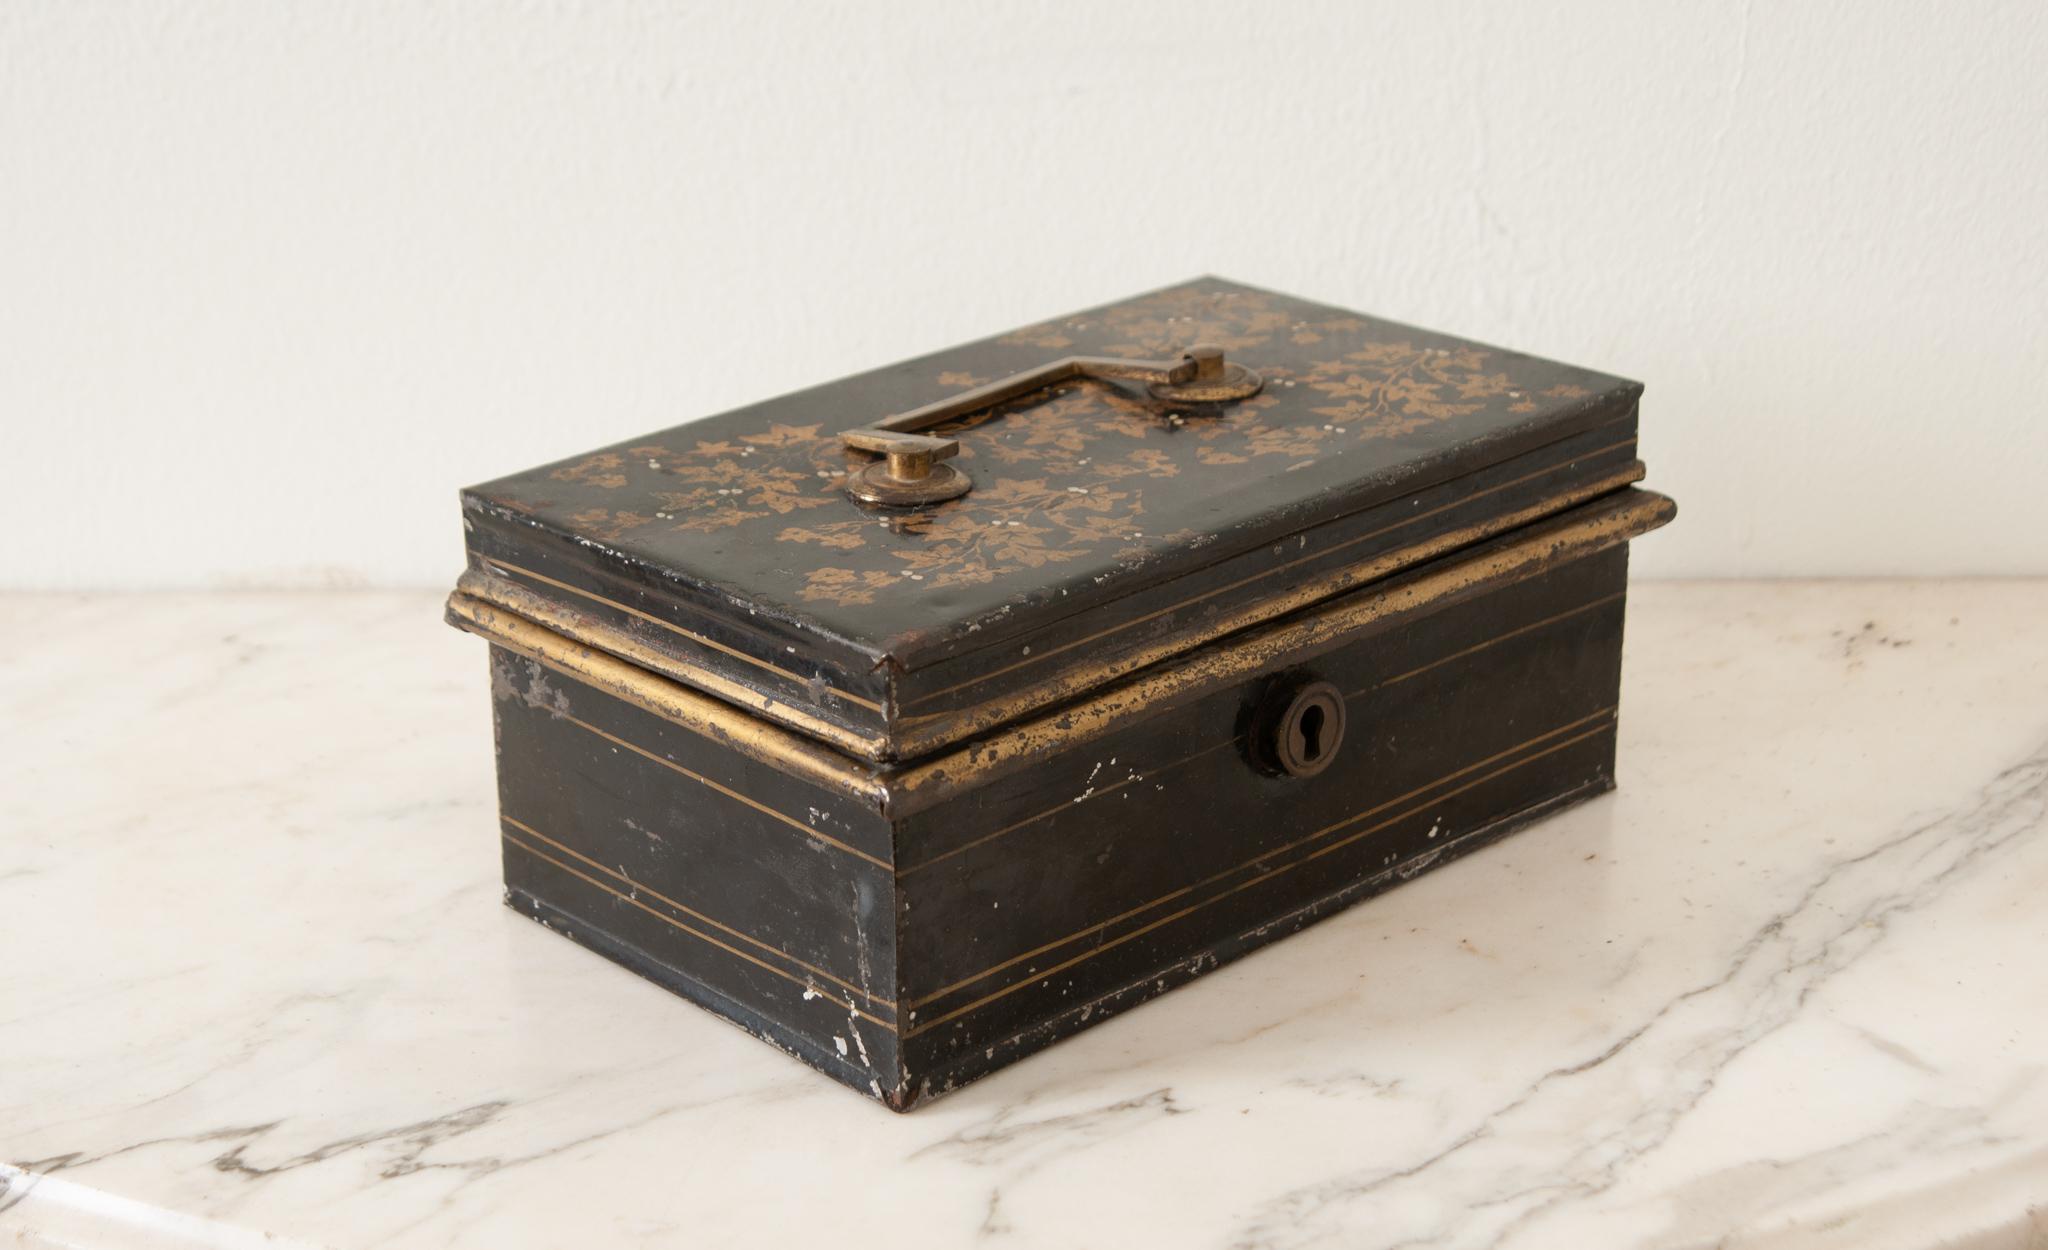 An English black tole box from ‘John Moreton & Company, Wolverhampton”. This small box has gold painted ivy designs with a brass center handle and opens to a fitted interior with two levels of storage. The top level has two compartments with hinged